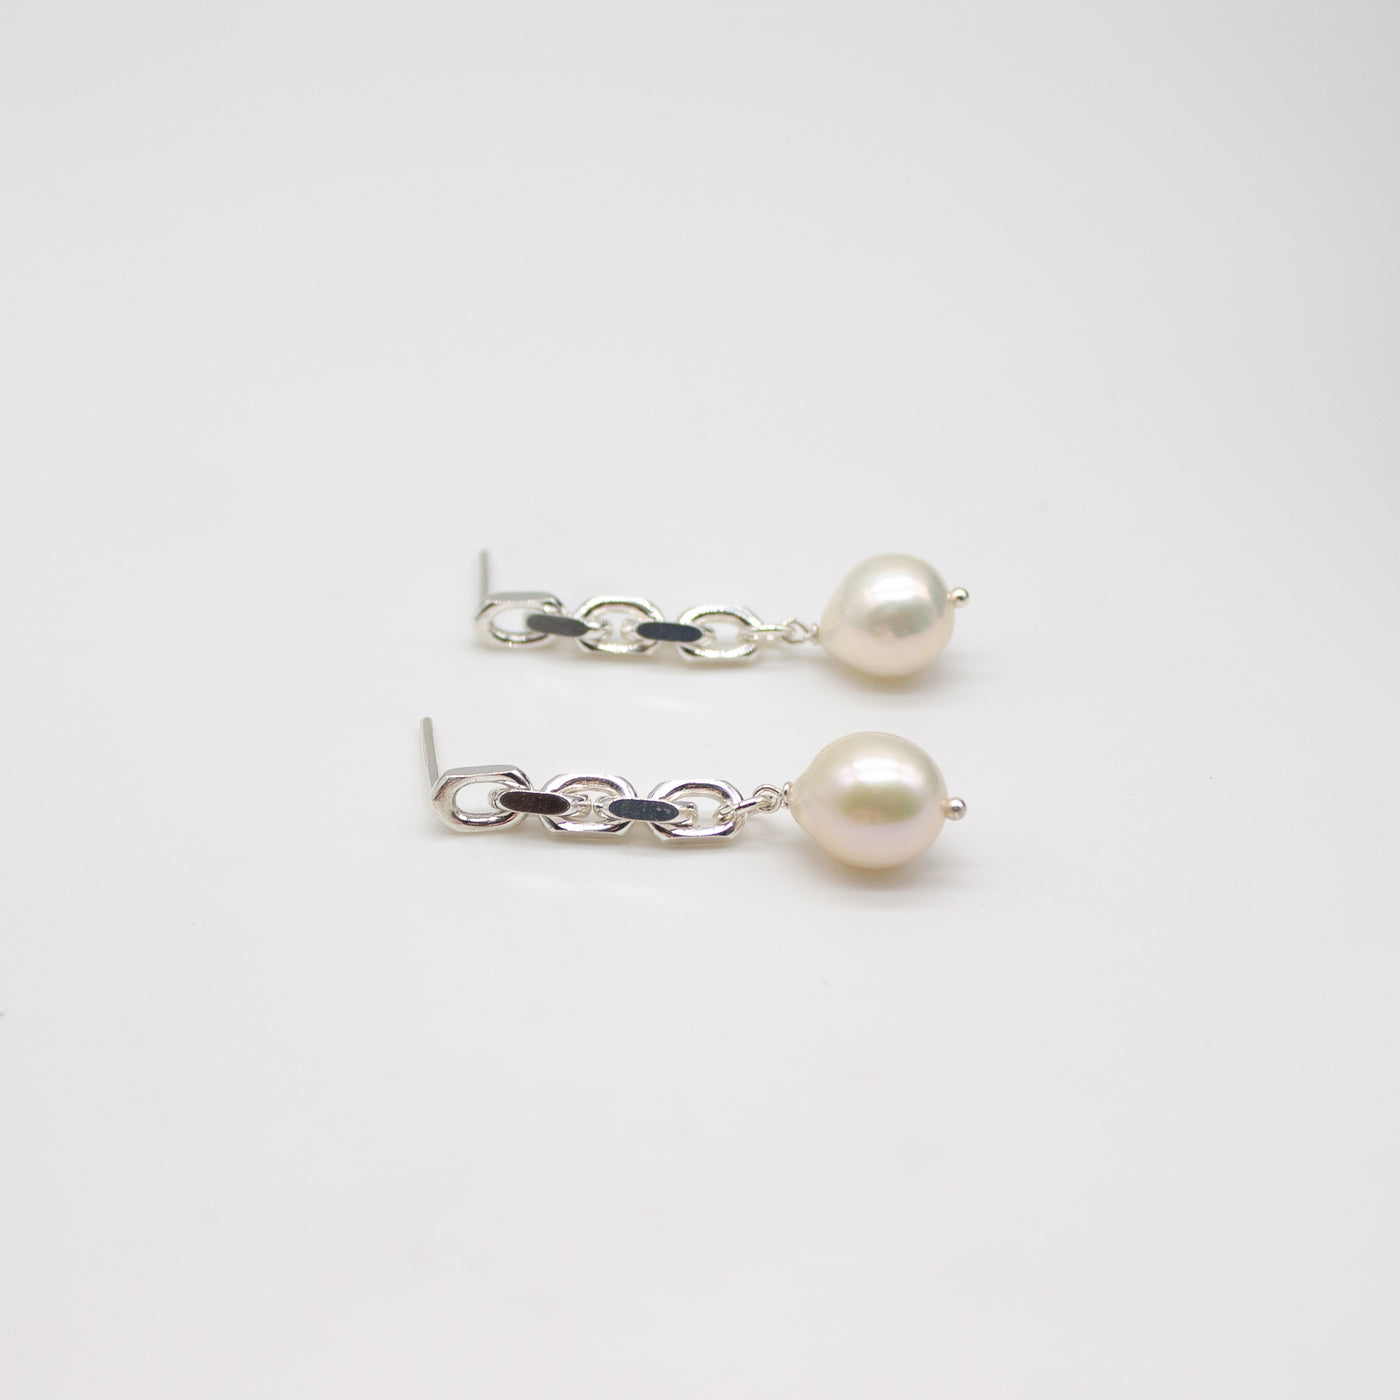 LYSEFJORD // Statement chain earrings with subtle baroque pearls